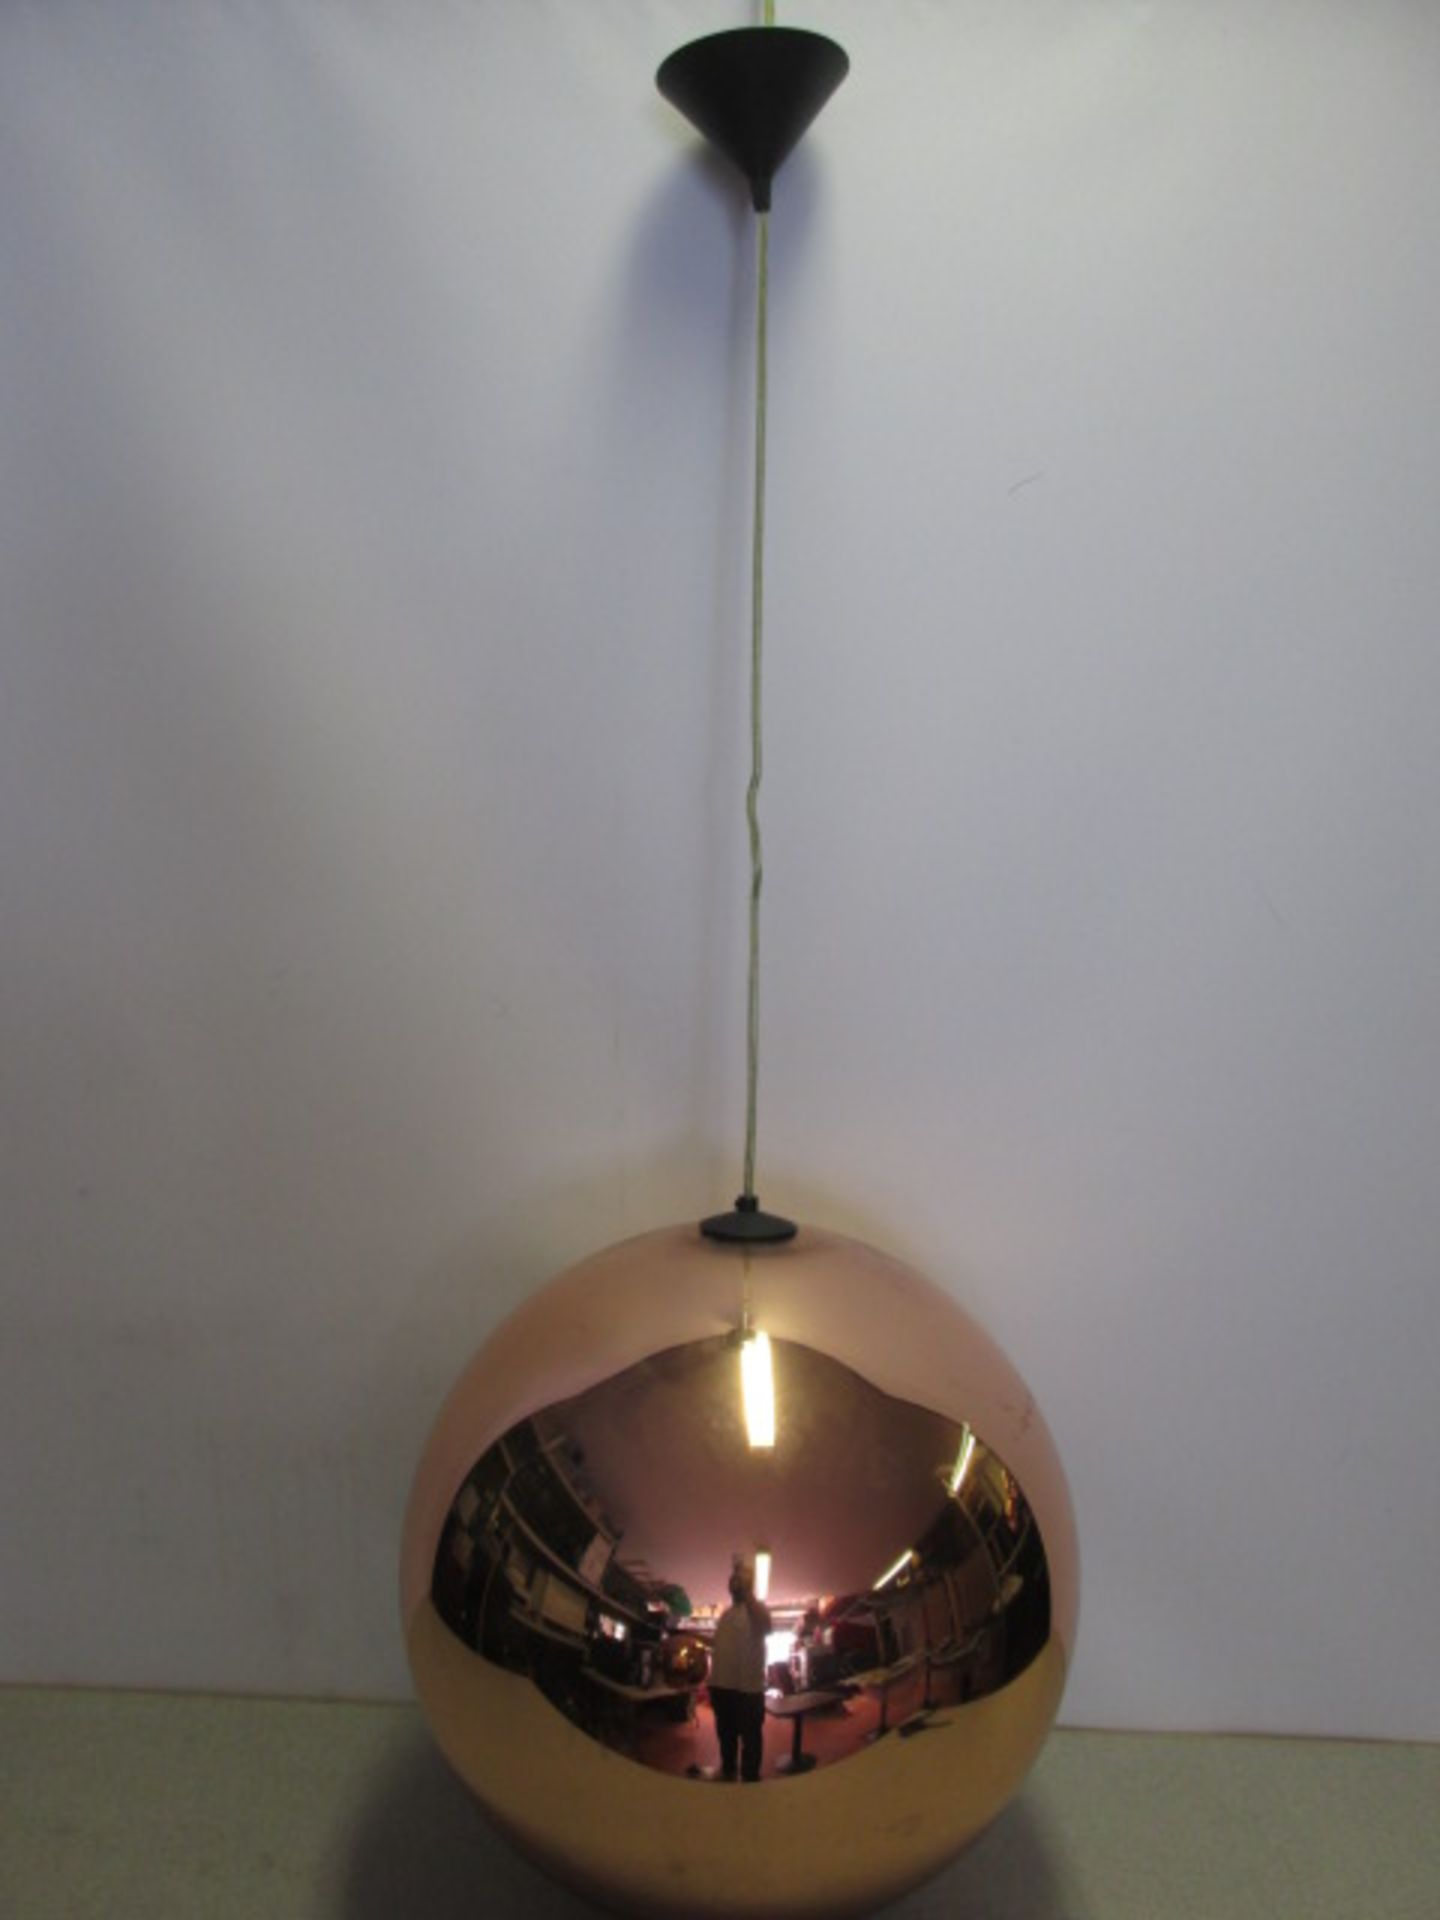 5 x Tom Dixon 25cm Pendant Ceiling Light. Made From a Polycarbonate Sphere. Colour Copper/Bronze - Image 3 of 4